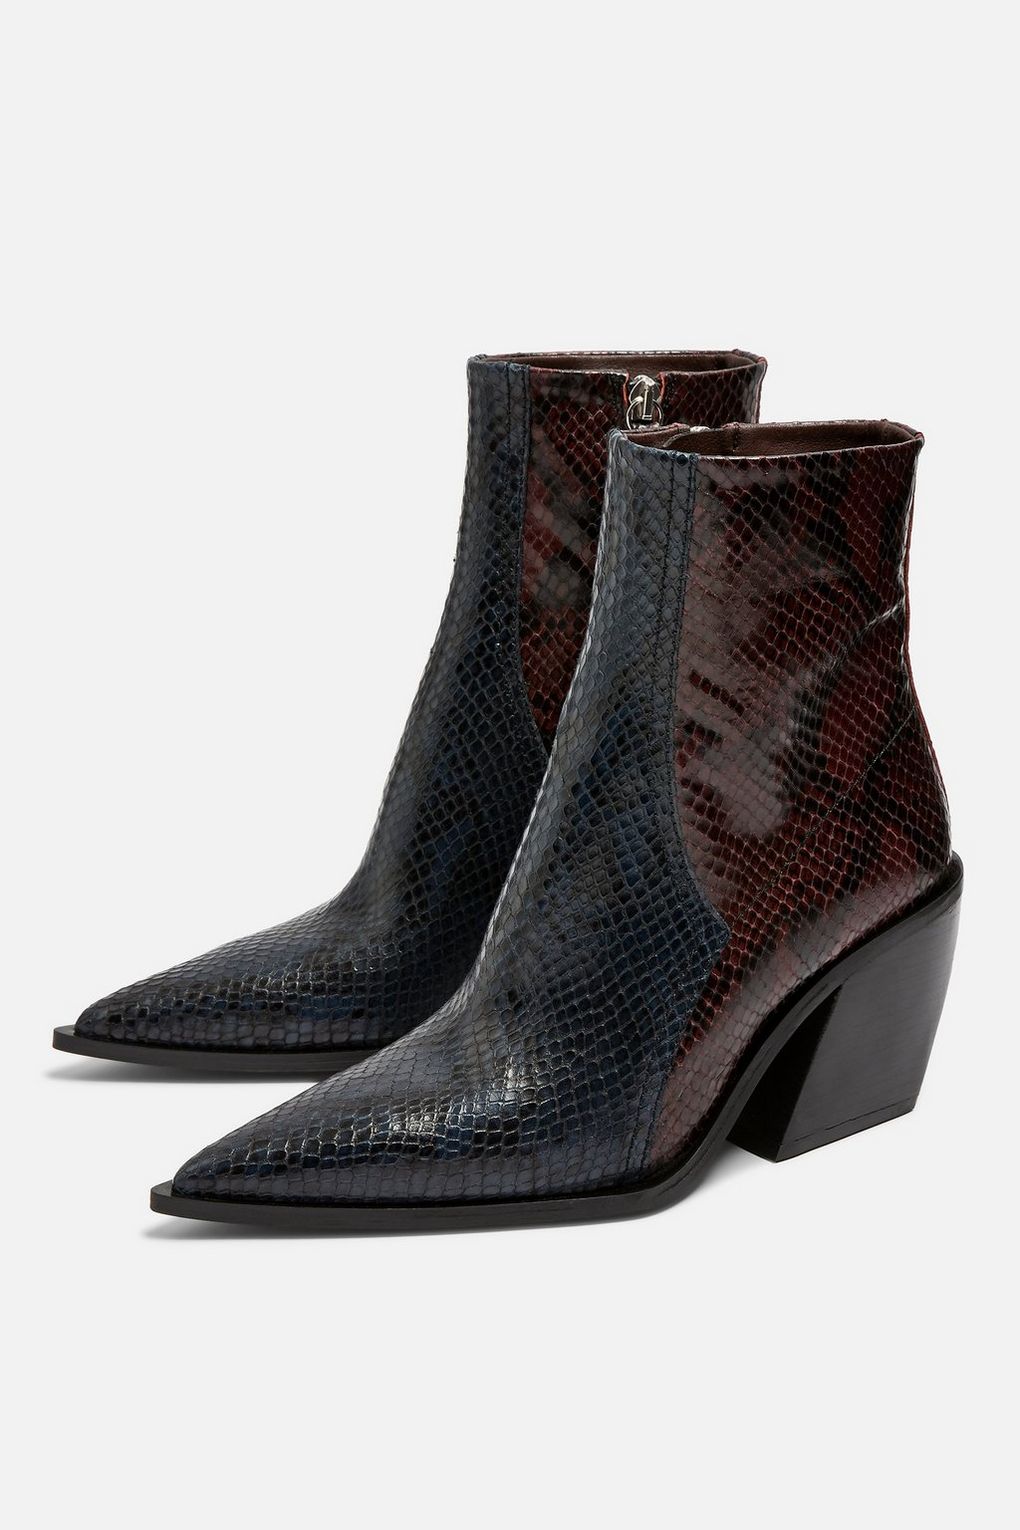 Topshop + Honour Leather Western Boots